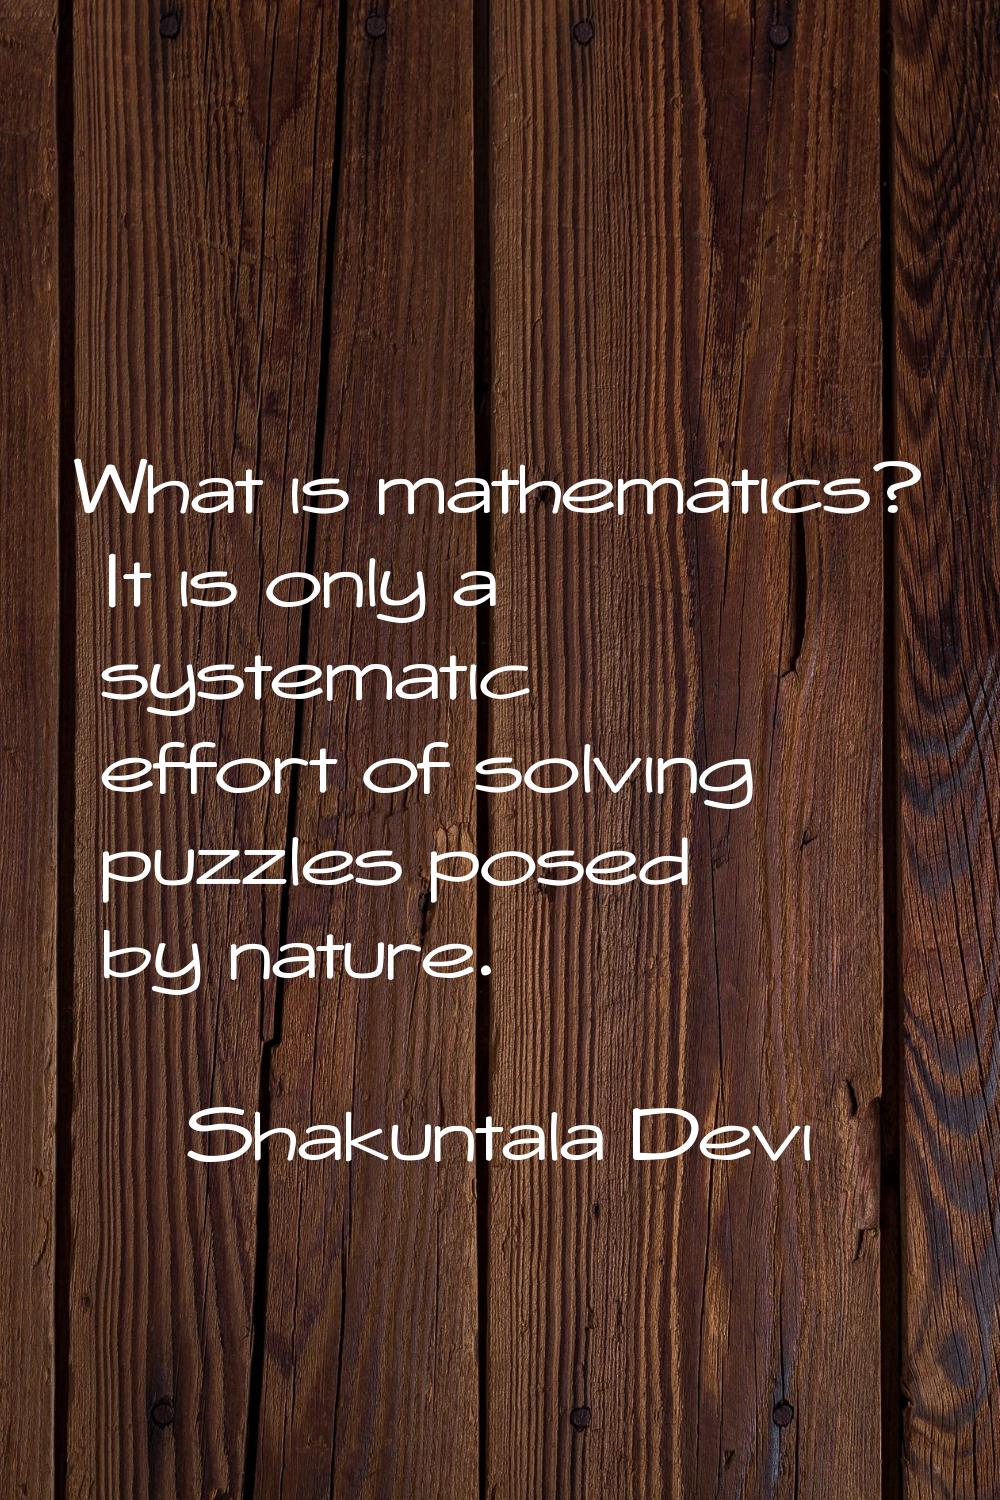 What is mathematics? It is only a systematic effort of solving puzzles posed by nature.